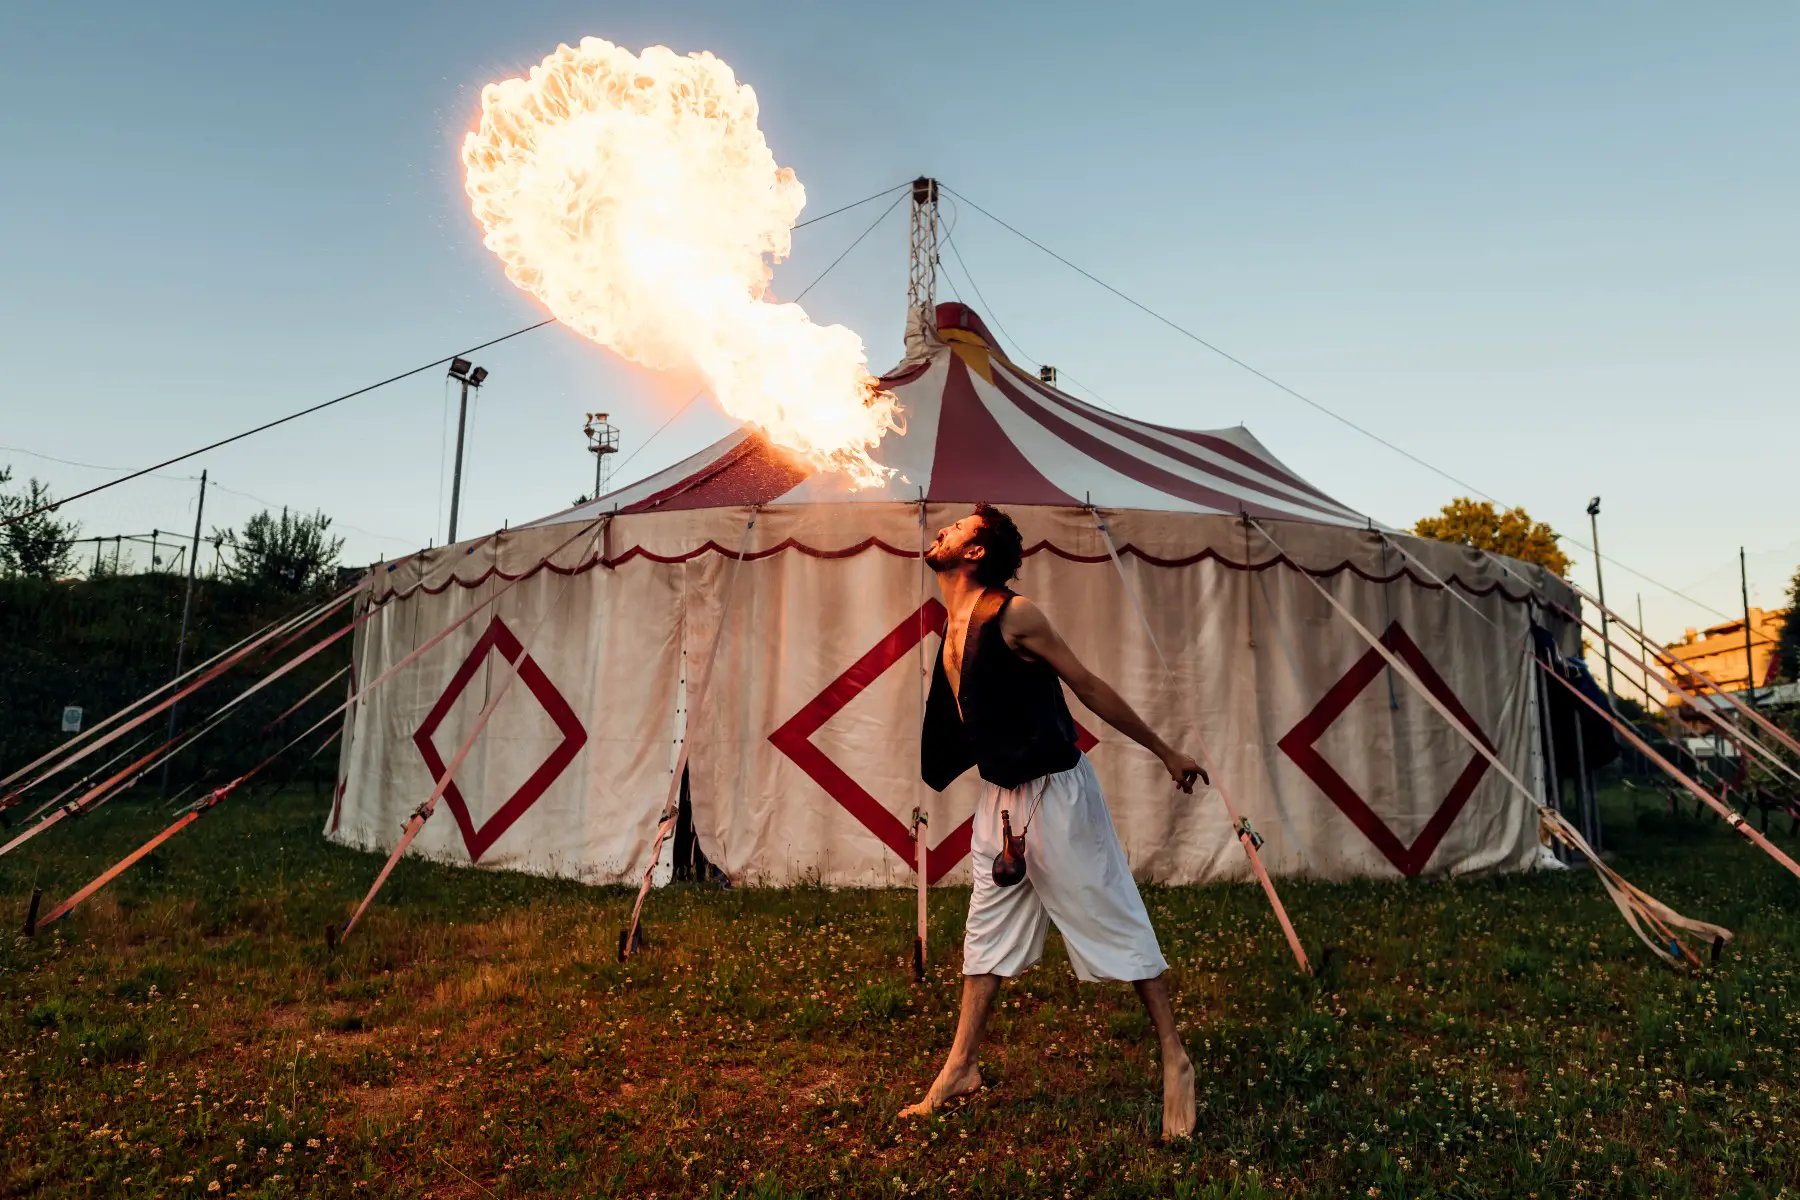 Man blowing fire in front of a circus tent.